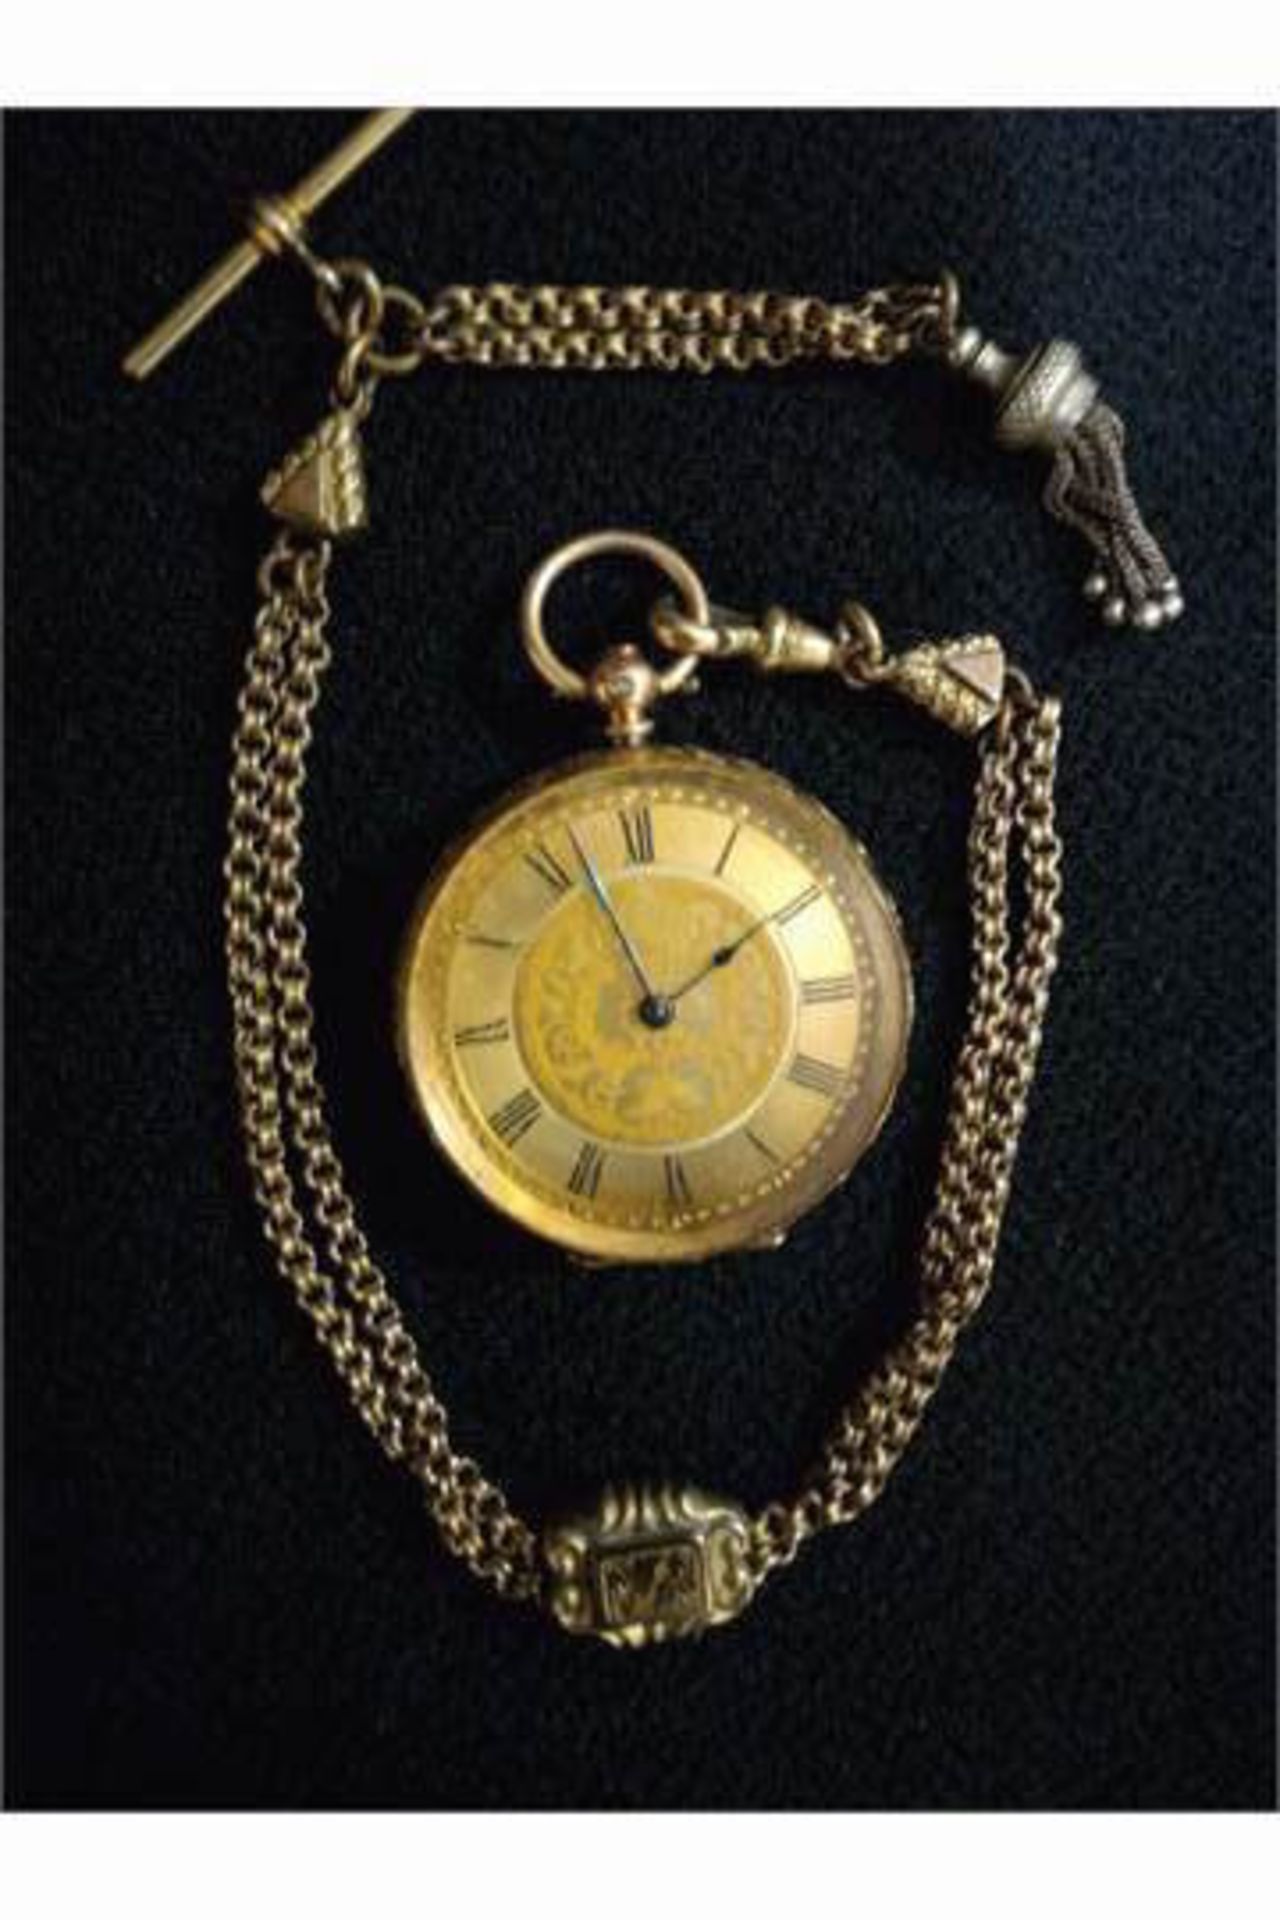 14 ct Cuivre pocket watch with yellow metal chain - Image 2 of 9